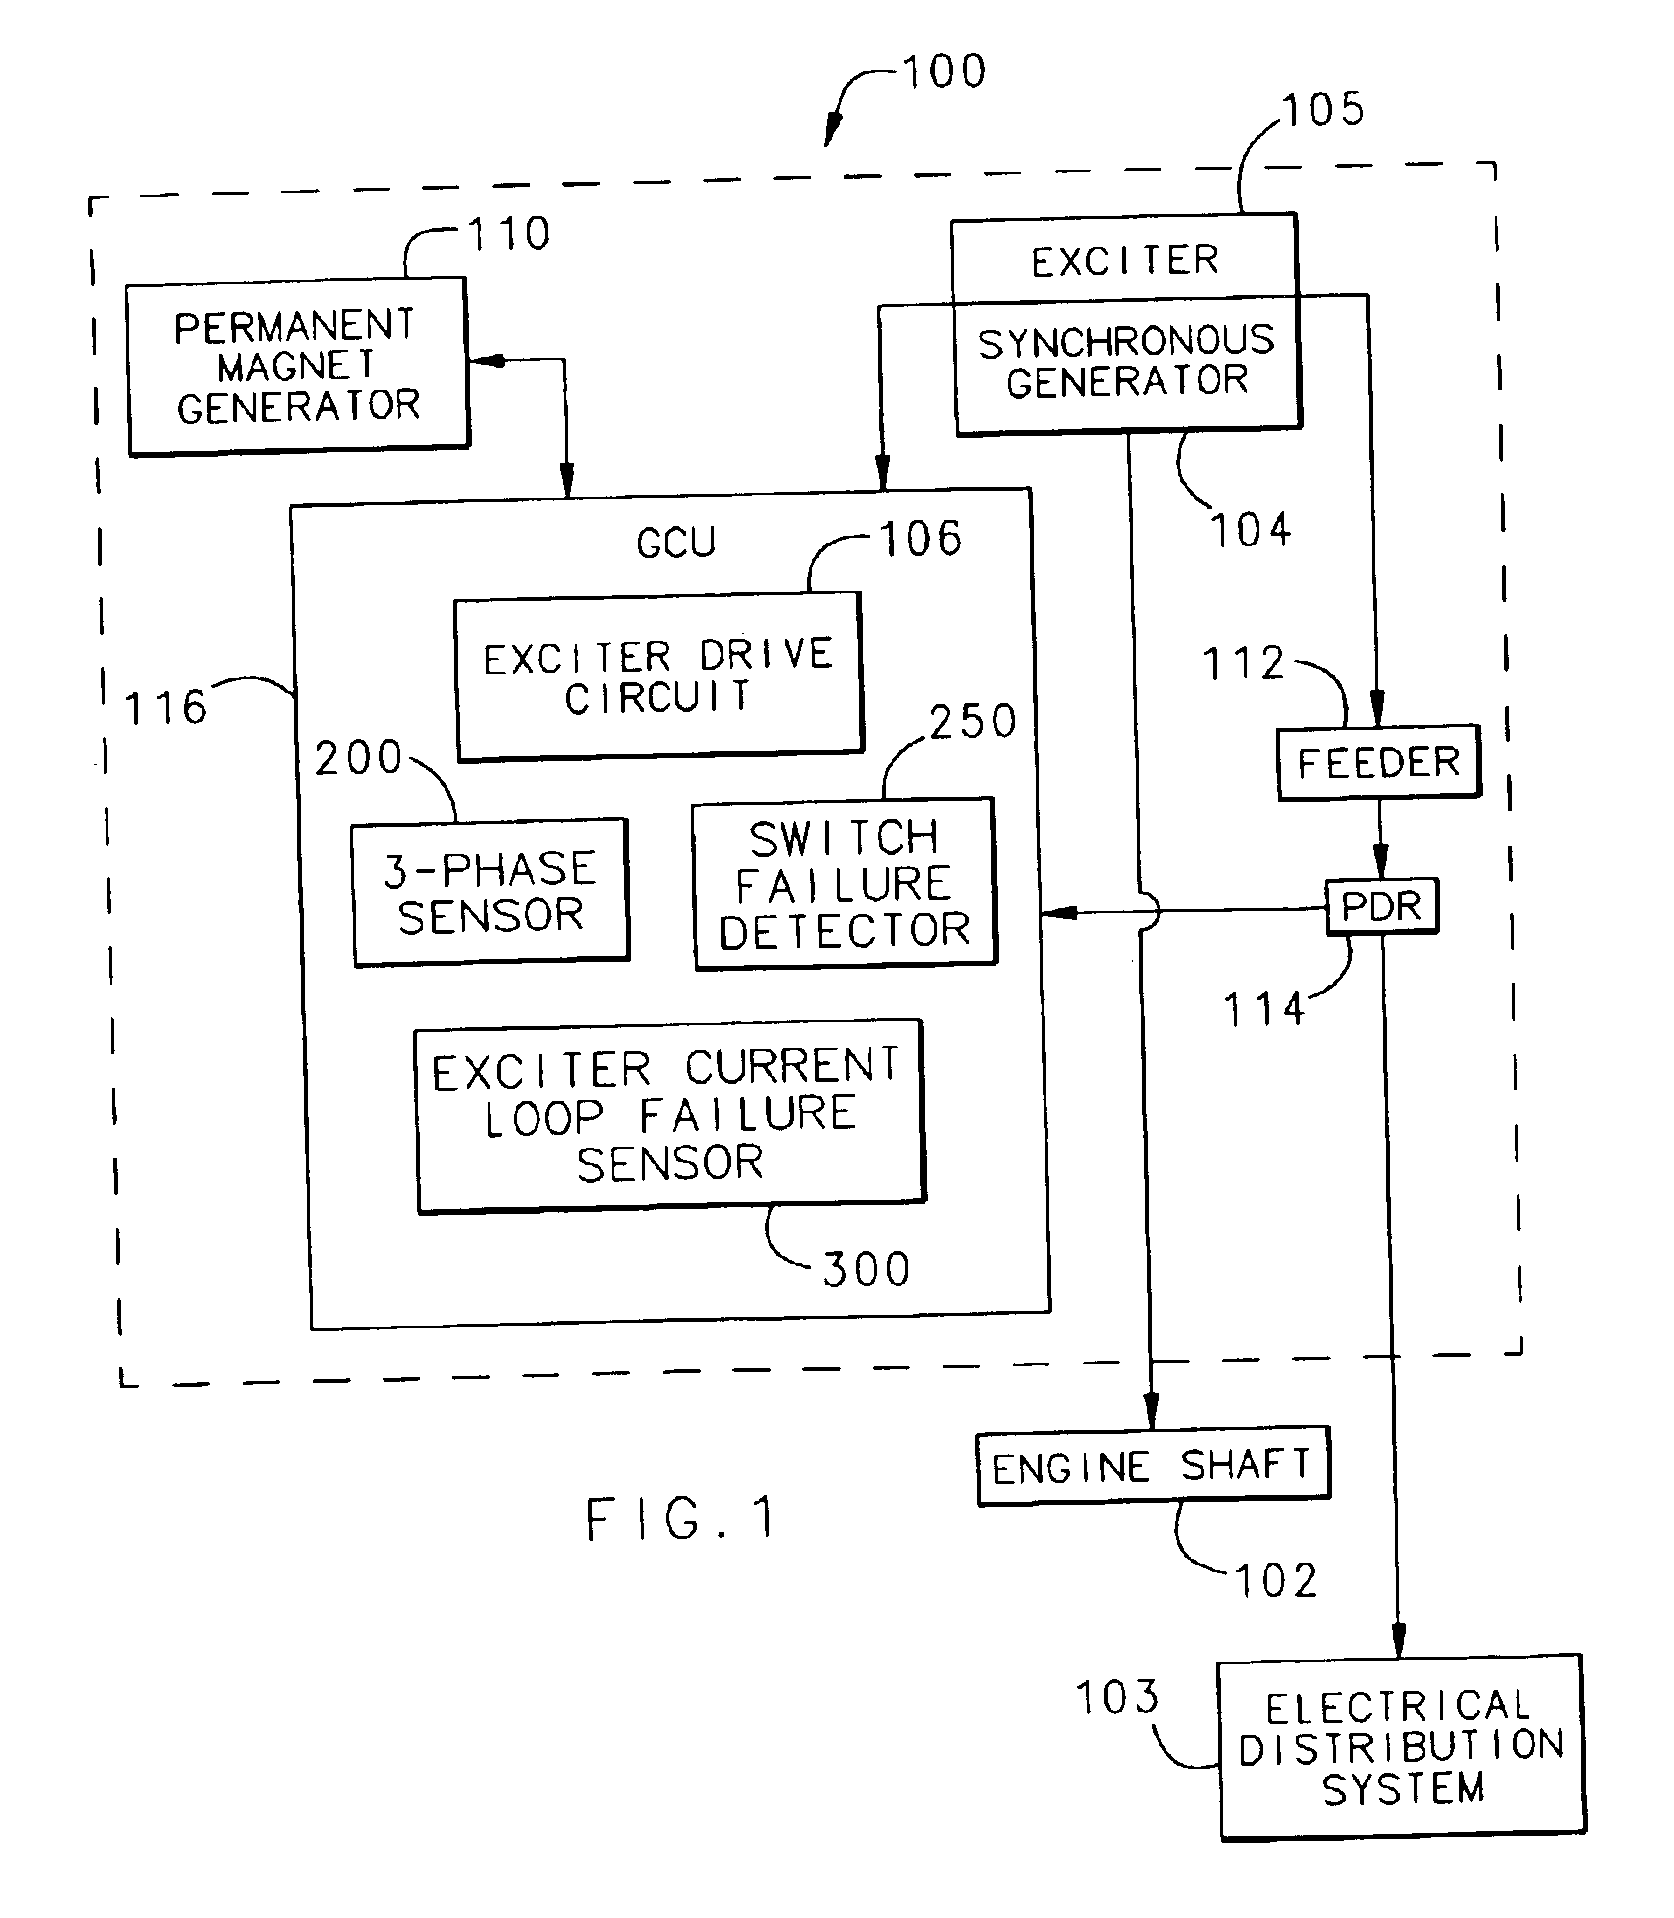 Excessive voltage protector for a variable frequency generating system